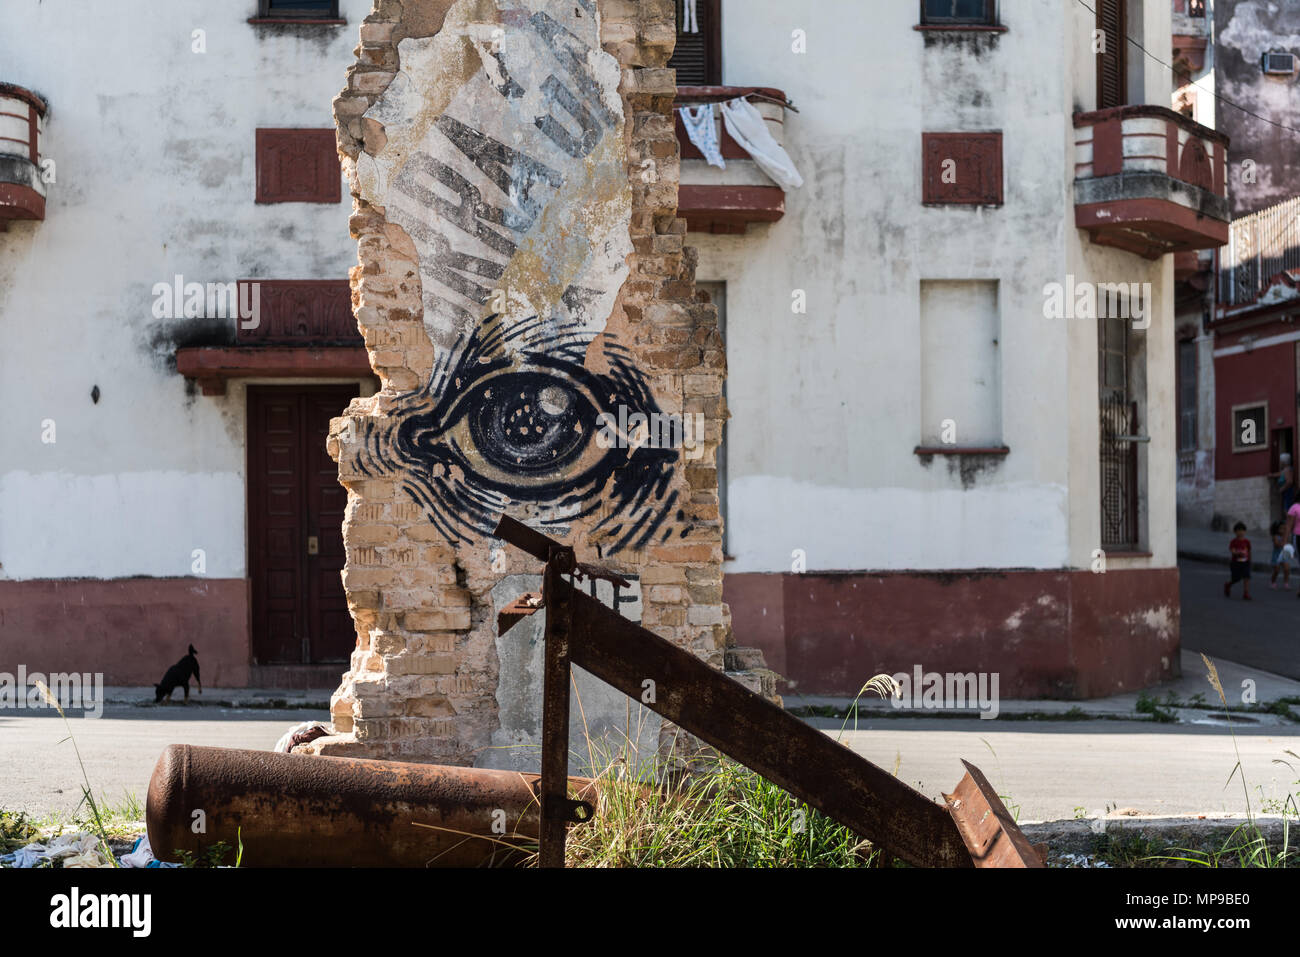 Havana, Cuba. May 1st 2018 Street art or graffiti depicting a eye in Havana, Cuba. Throughout the city of Havana, the work of graffiti artists covers many abandoned and not abandoned buildings. Caleb Hughes/Alamy Live News Stock Photo